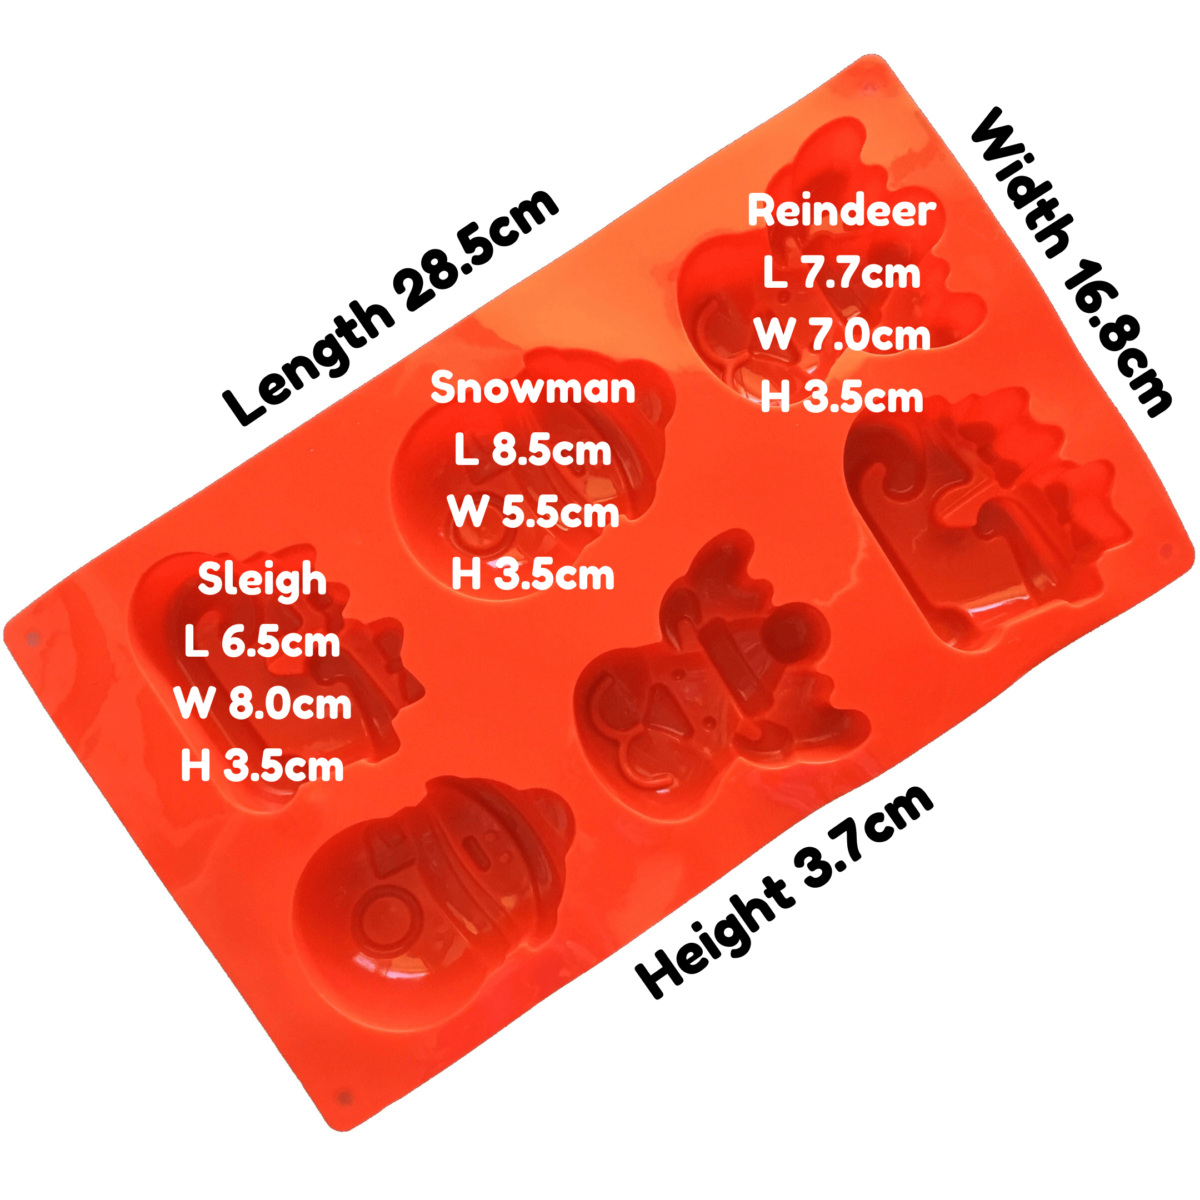 written dimensions of ed christmas themed silicone mould with six cavities - two each of santa sleigh, reindeer face, snowman cavities